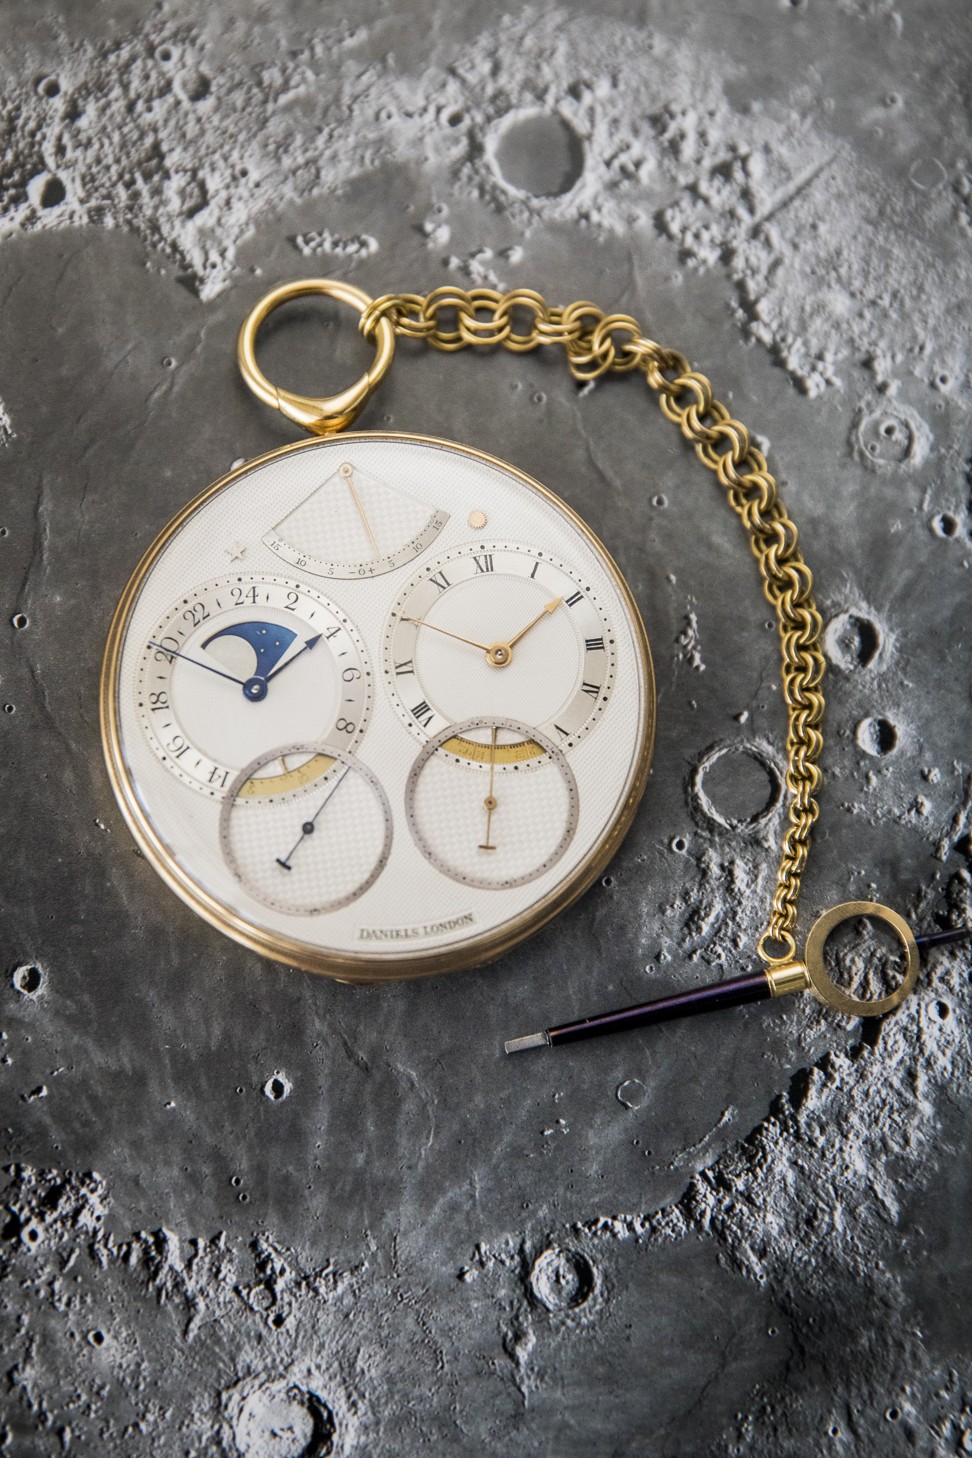 The Space Traveller I is a high complication pocket watch inspired by the Apollo 11 moon landing. It features solar and sidereal time, equation of time, moon phase and a double wheel escapement signature to George Daniel timepieces.